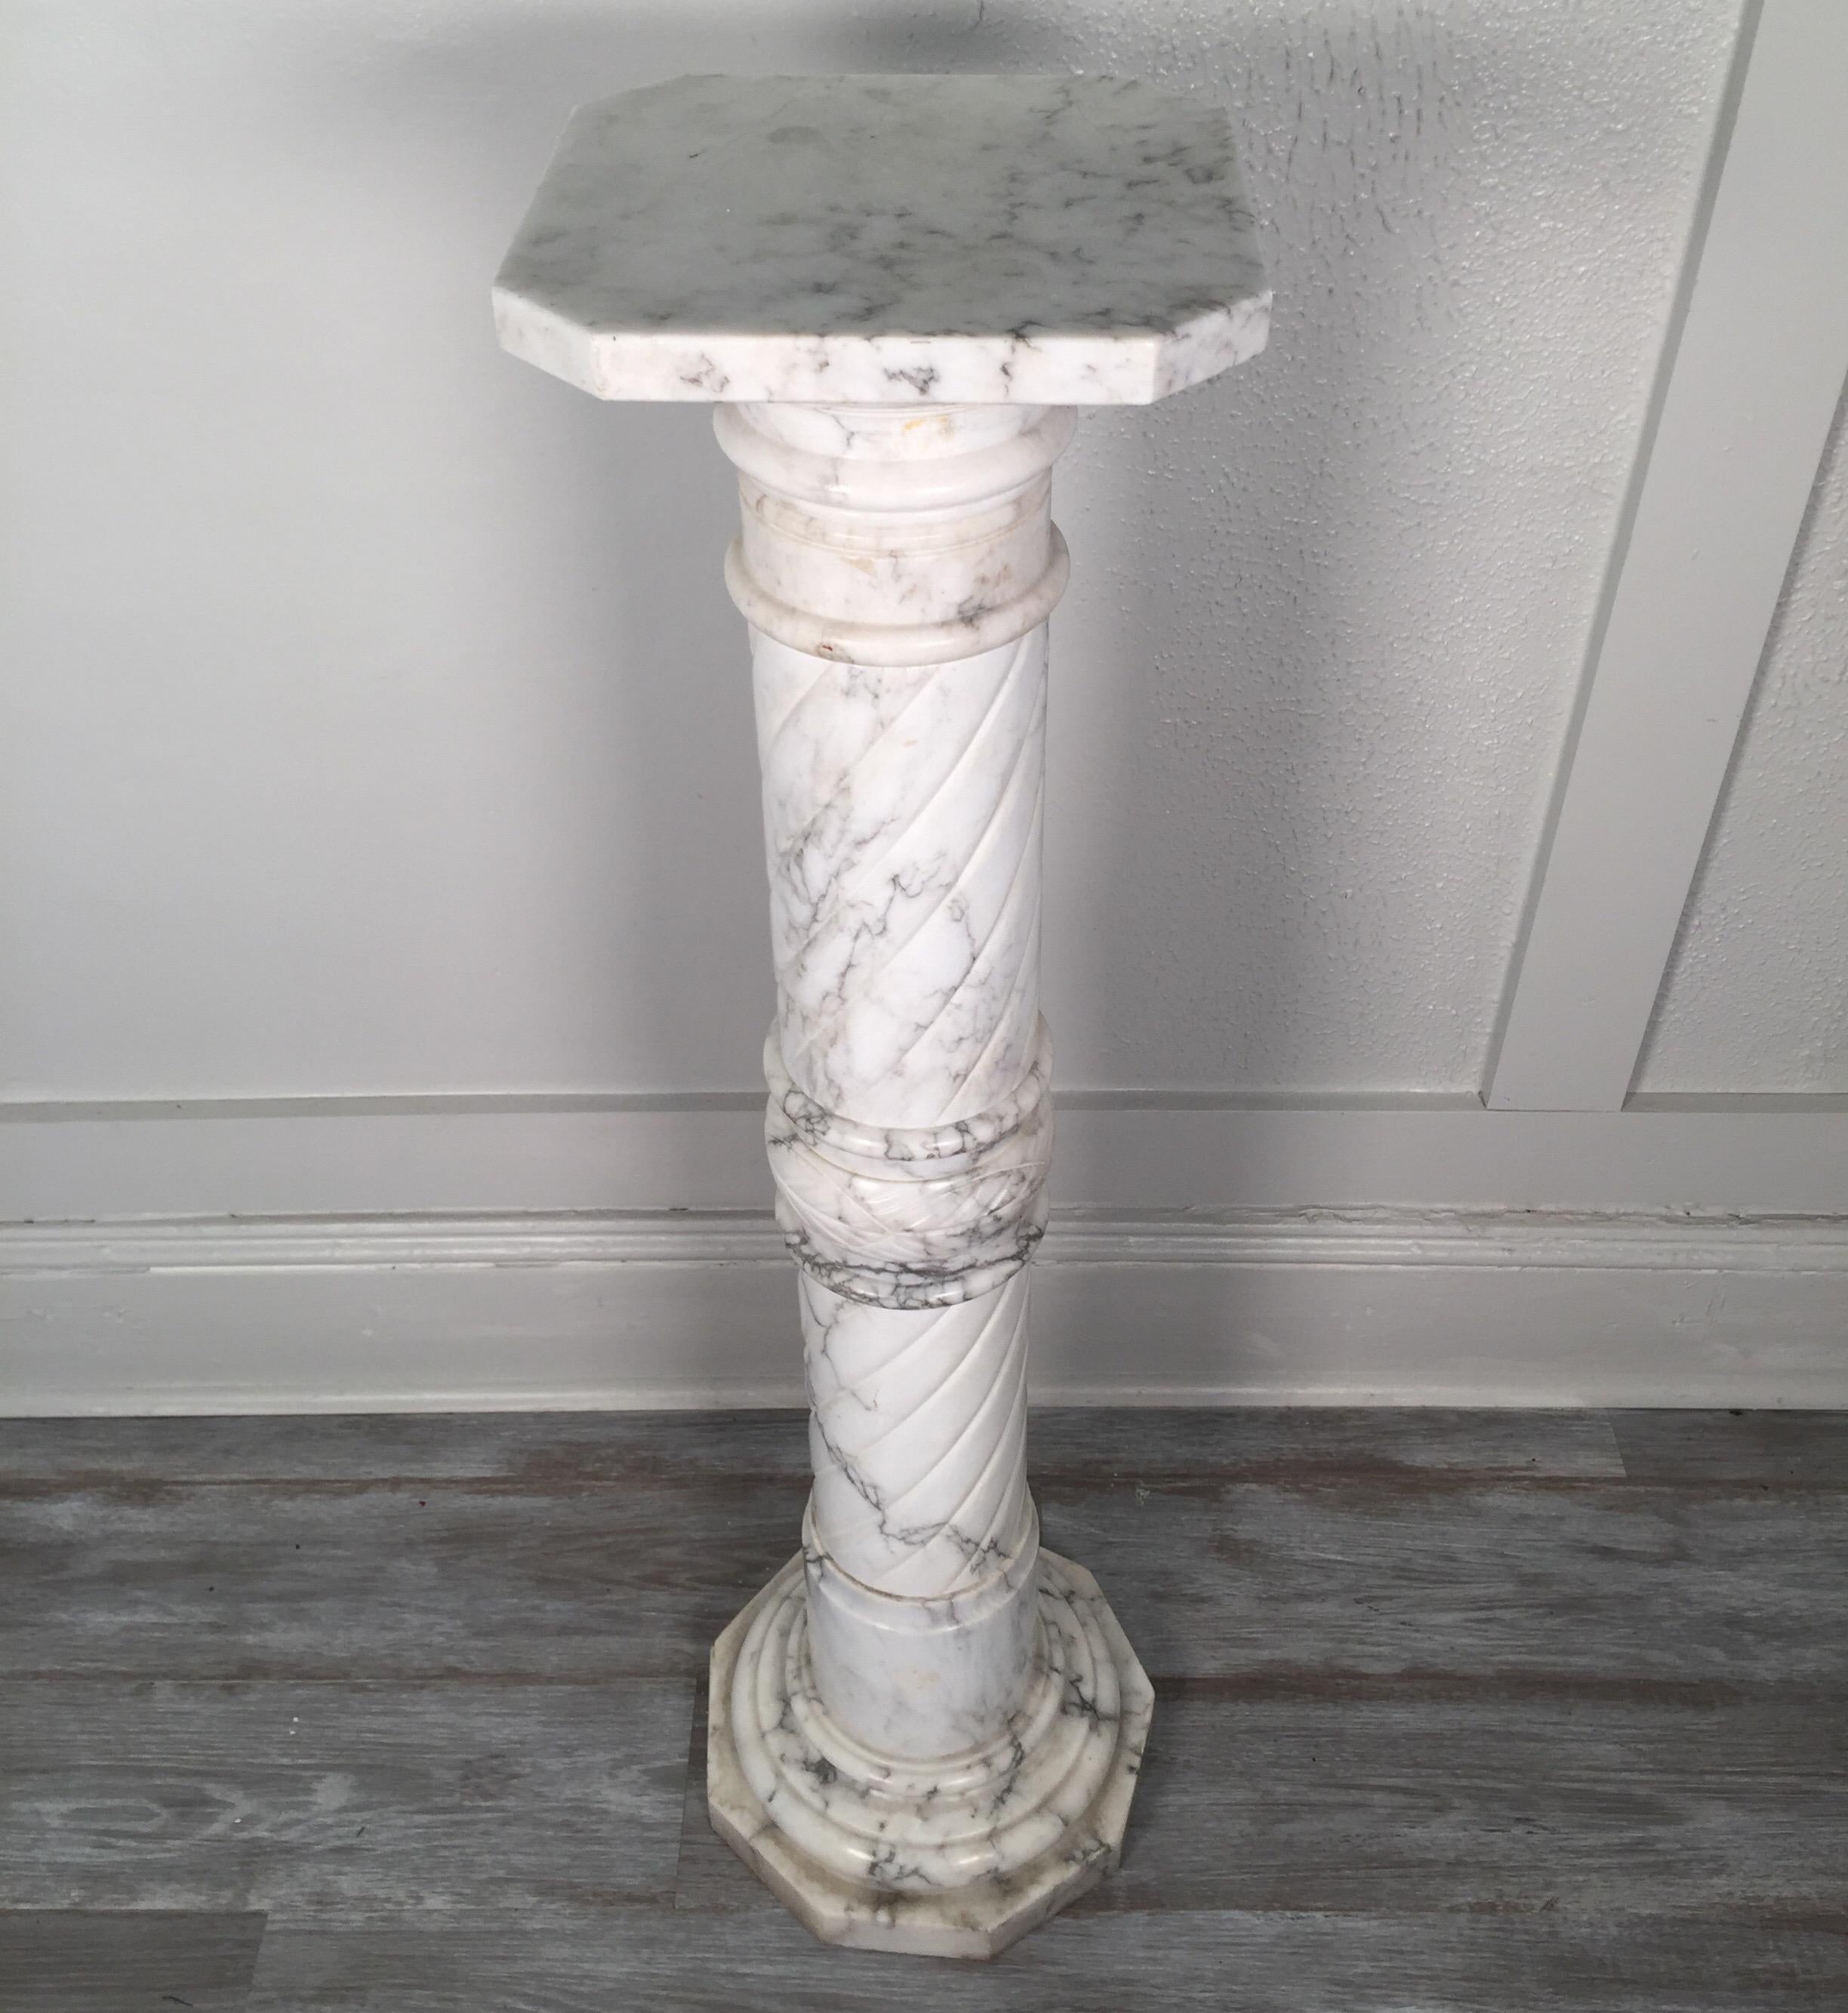 Nice white Italian marble pedestal made in Italy, circa 1910-1920.
With some carving throughout.
Dimensions: 43.50